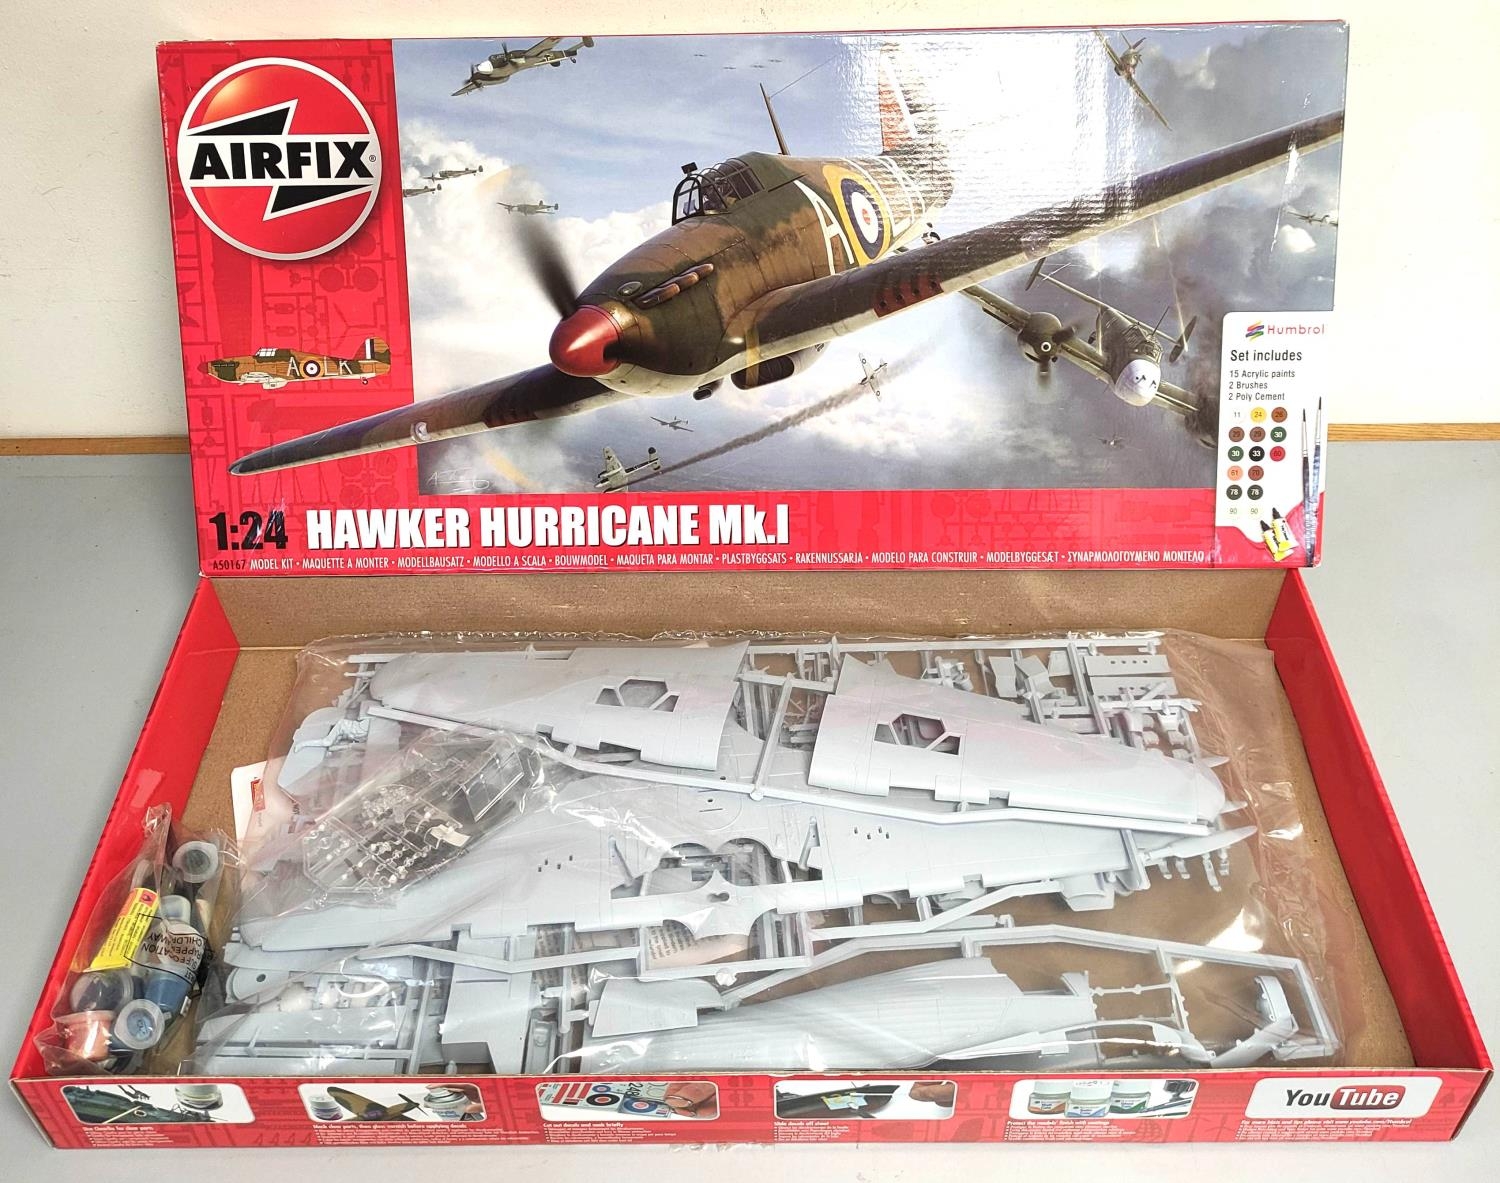 Airfix. Boxed 1:24 scale Hawker Hurricane Mk.I model. Kit no. A50167. Complete and components - Image 2 of 5